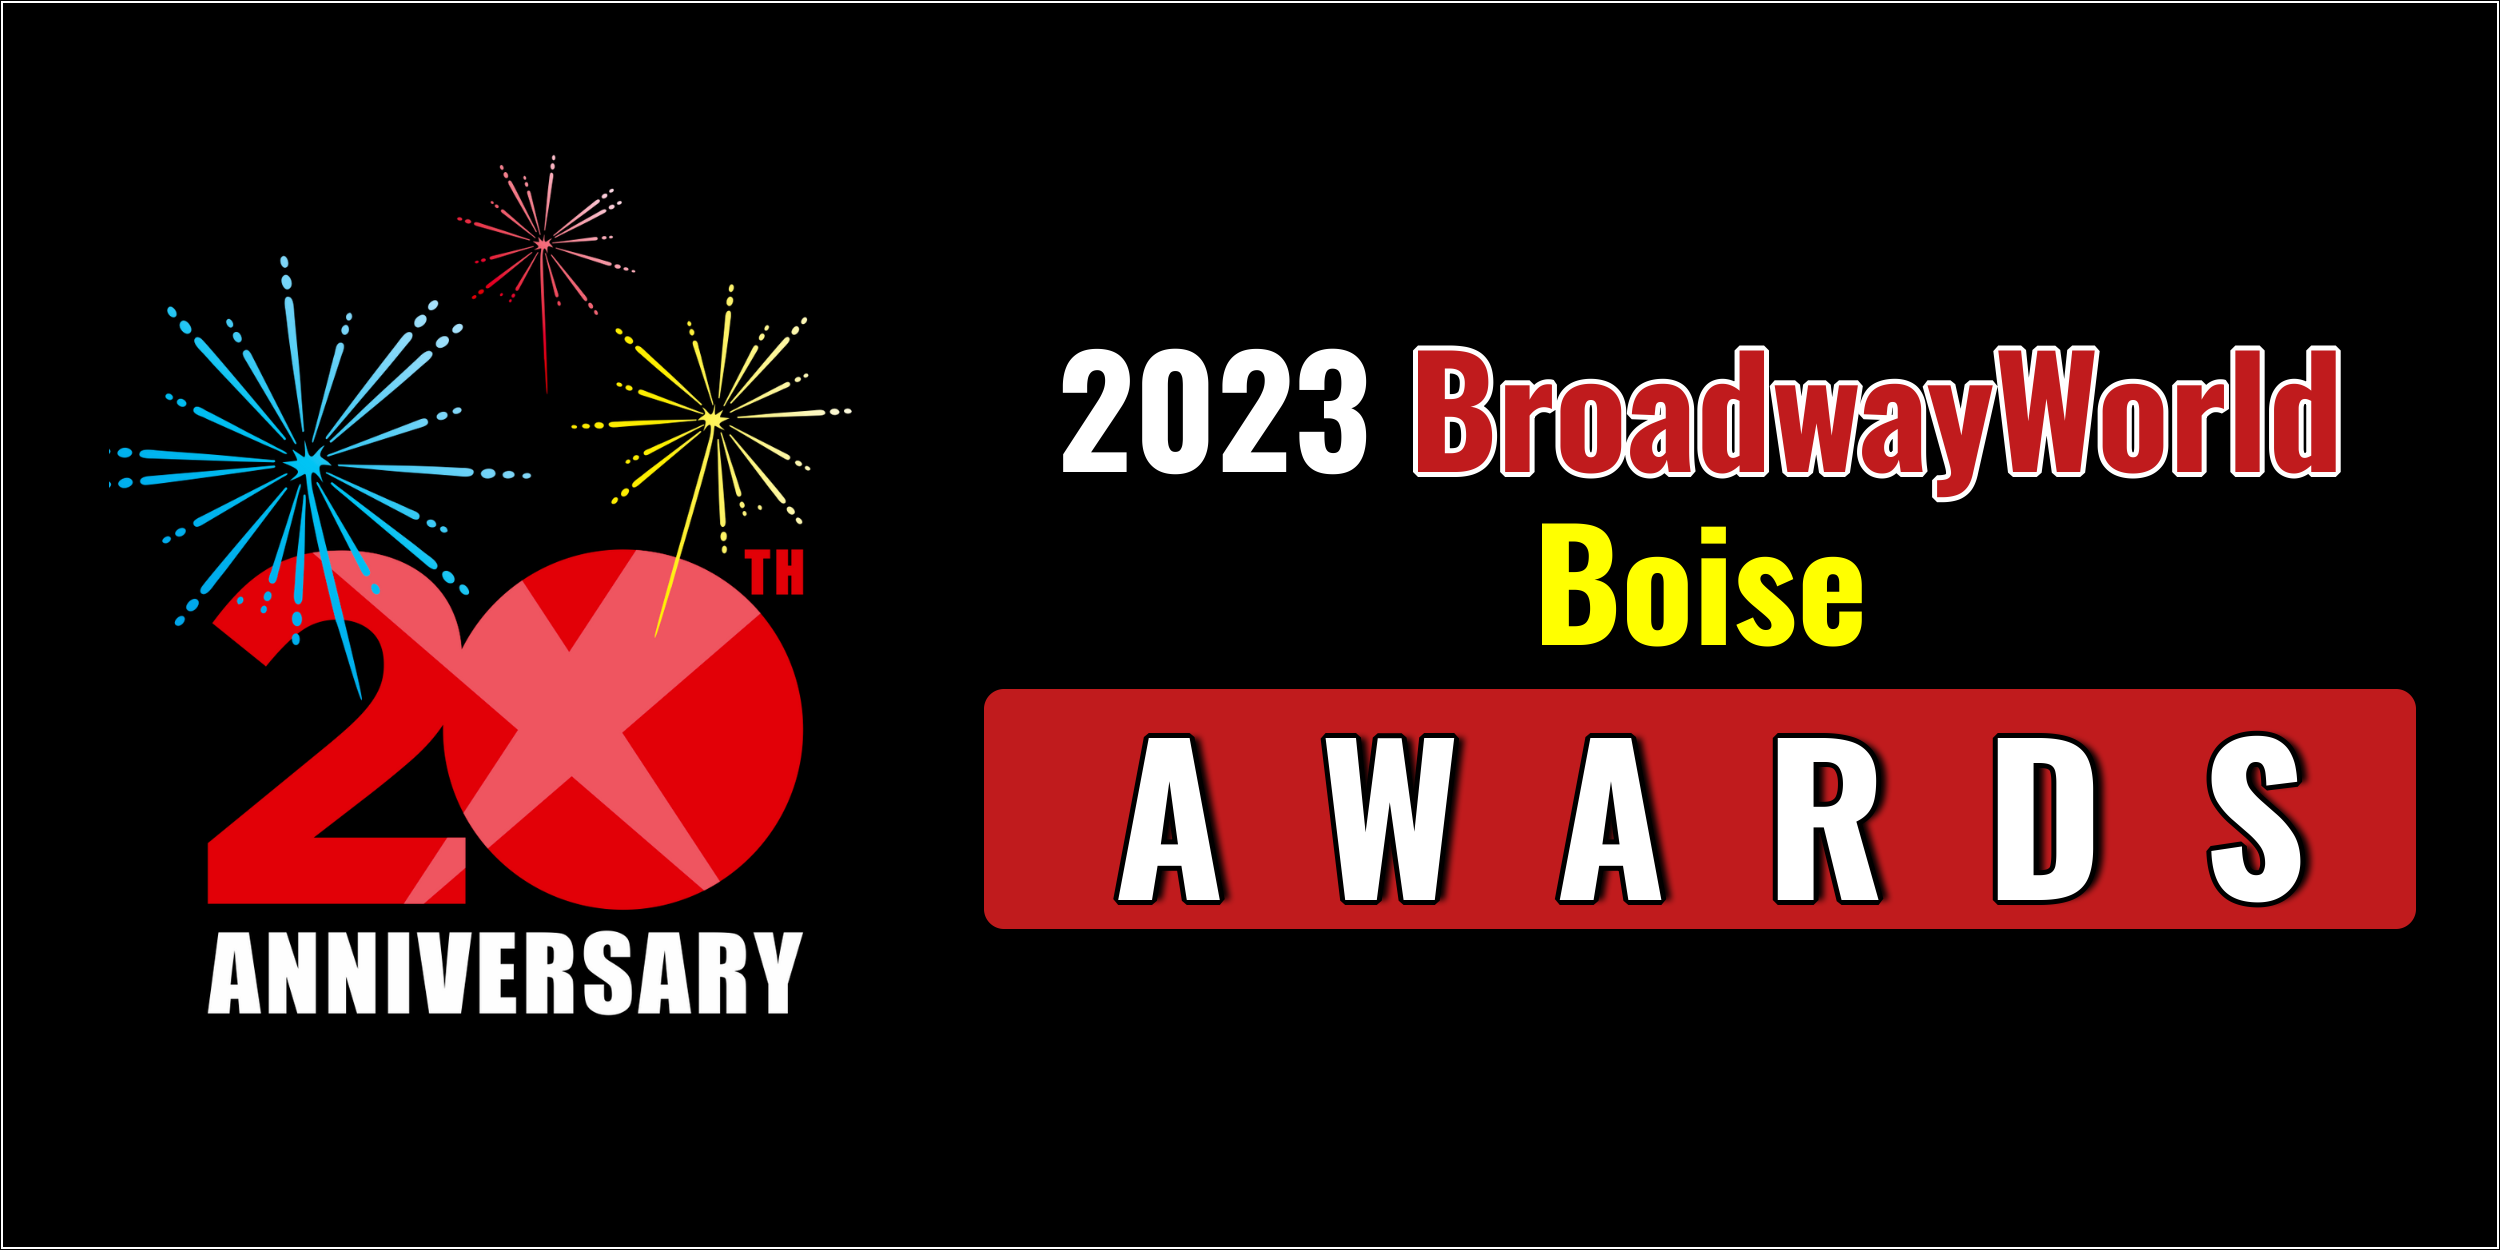 Latest Standings Announced For The 2023 BroadwayWorld Boise Awards; CLUE Leads Best Play! Photo